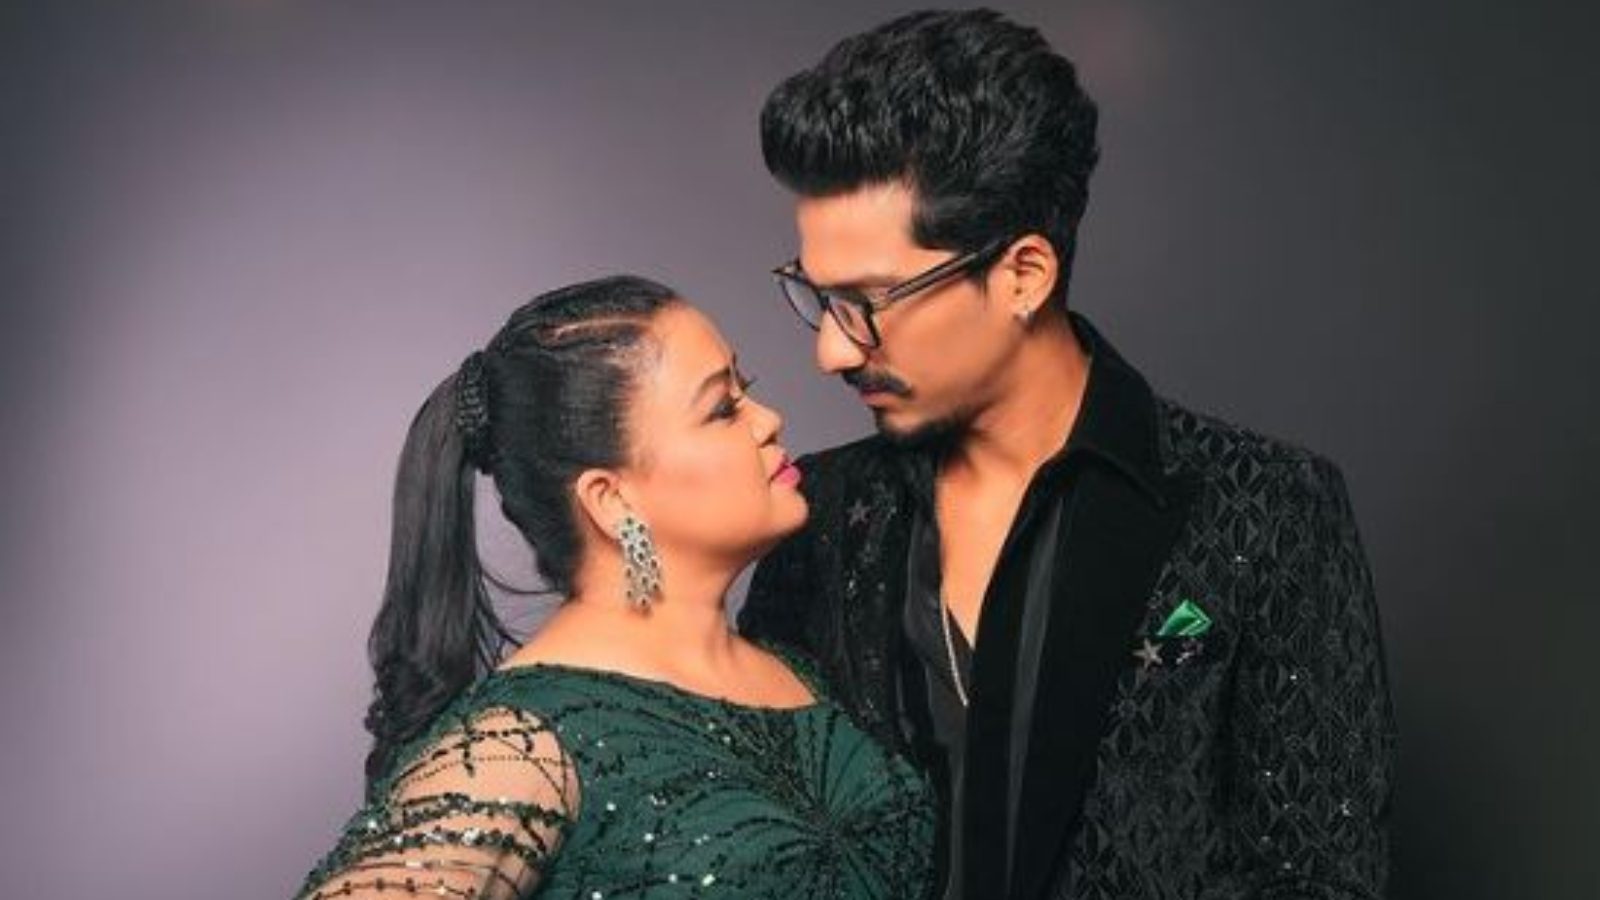 Haarsh Limbachiyaa Posts An Adorable Note For His Jaan Bharti Singh On Her Birthday See Pic